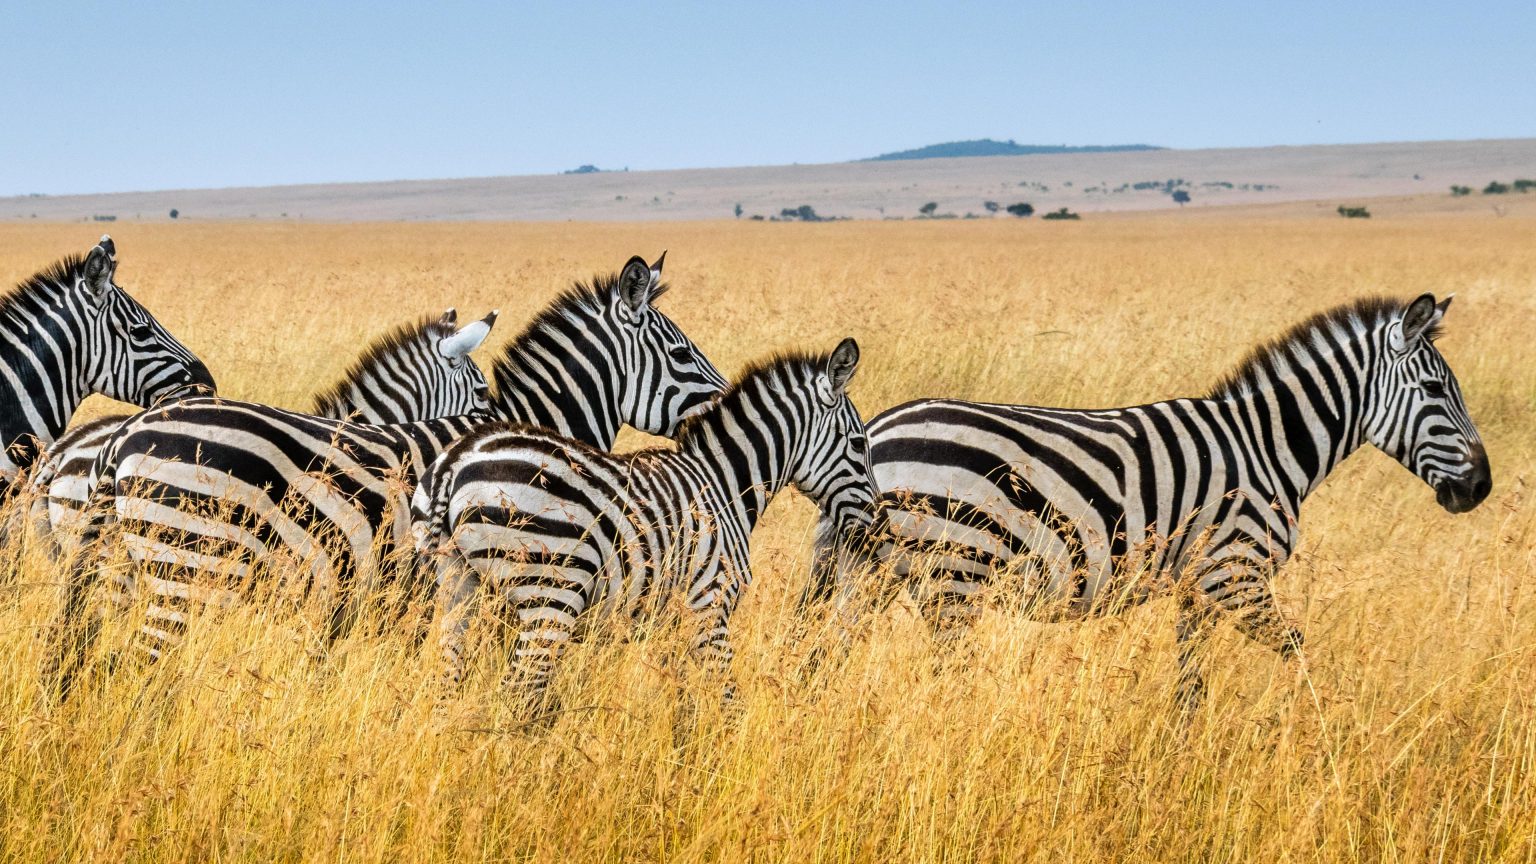 The Mystery Of Why Zebras Have Their Stripes Has Baffled Scientists 1810